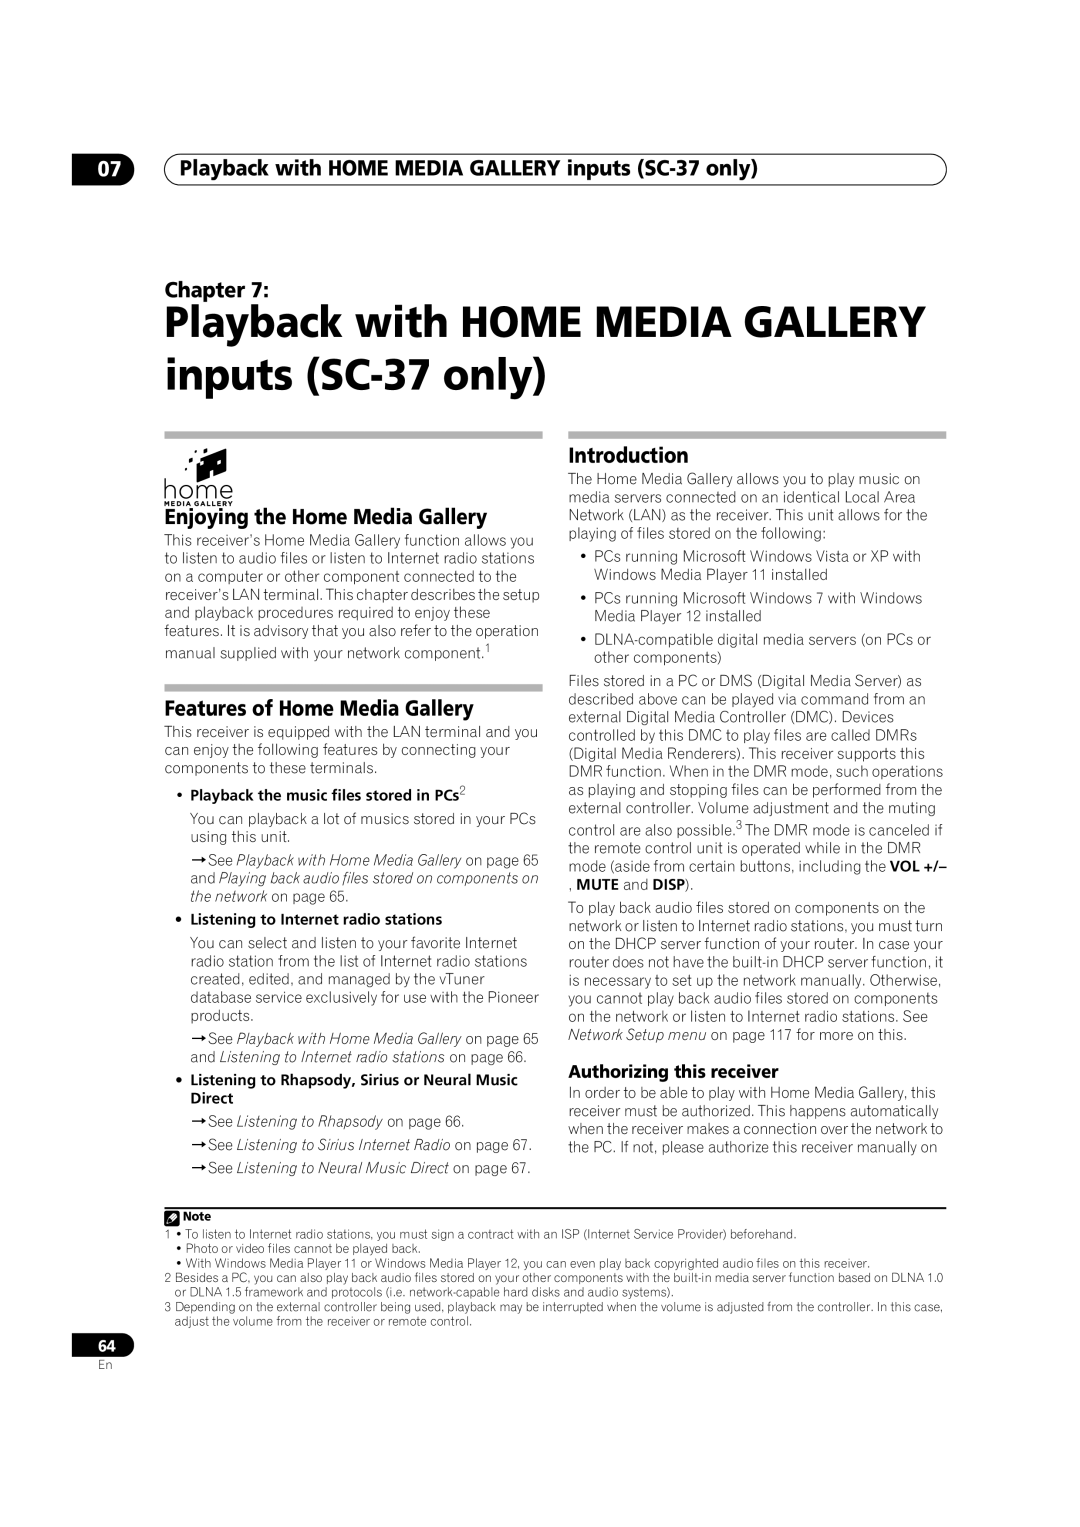 Pioneer SC-35 Playback with HOME MEDIA GALLERY inputs SC-37only, Introduction, Enjoying the Home Media Gallery, Chapter 